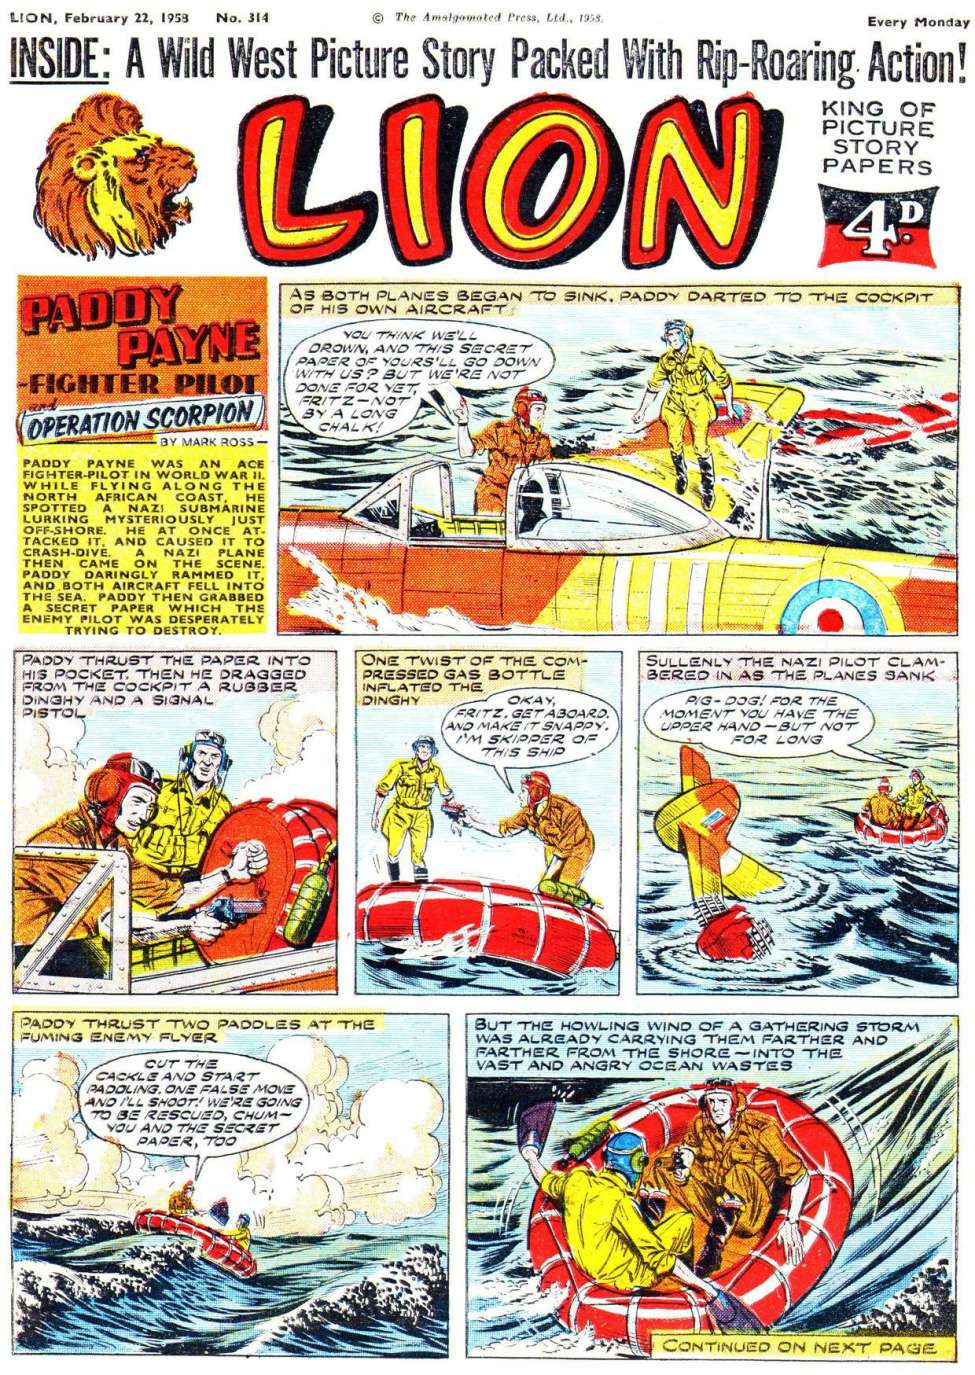 Comic Book Cover For Lion 314